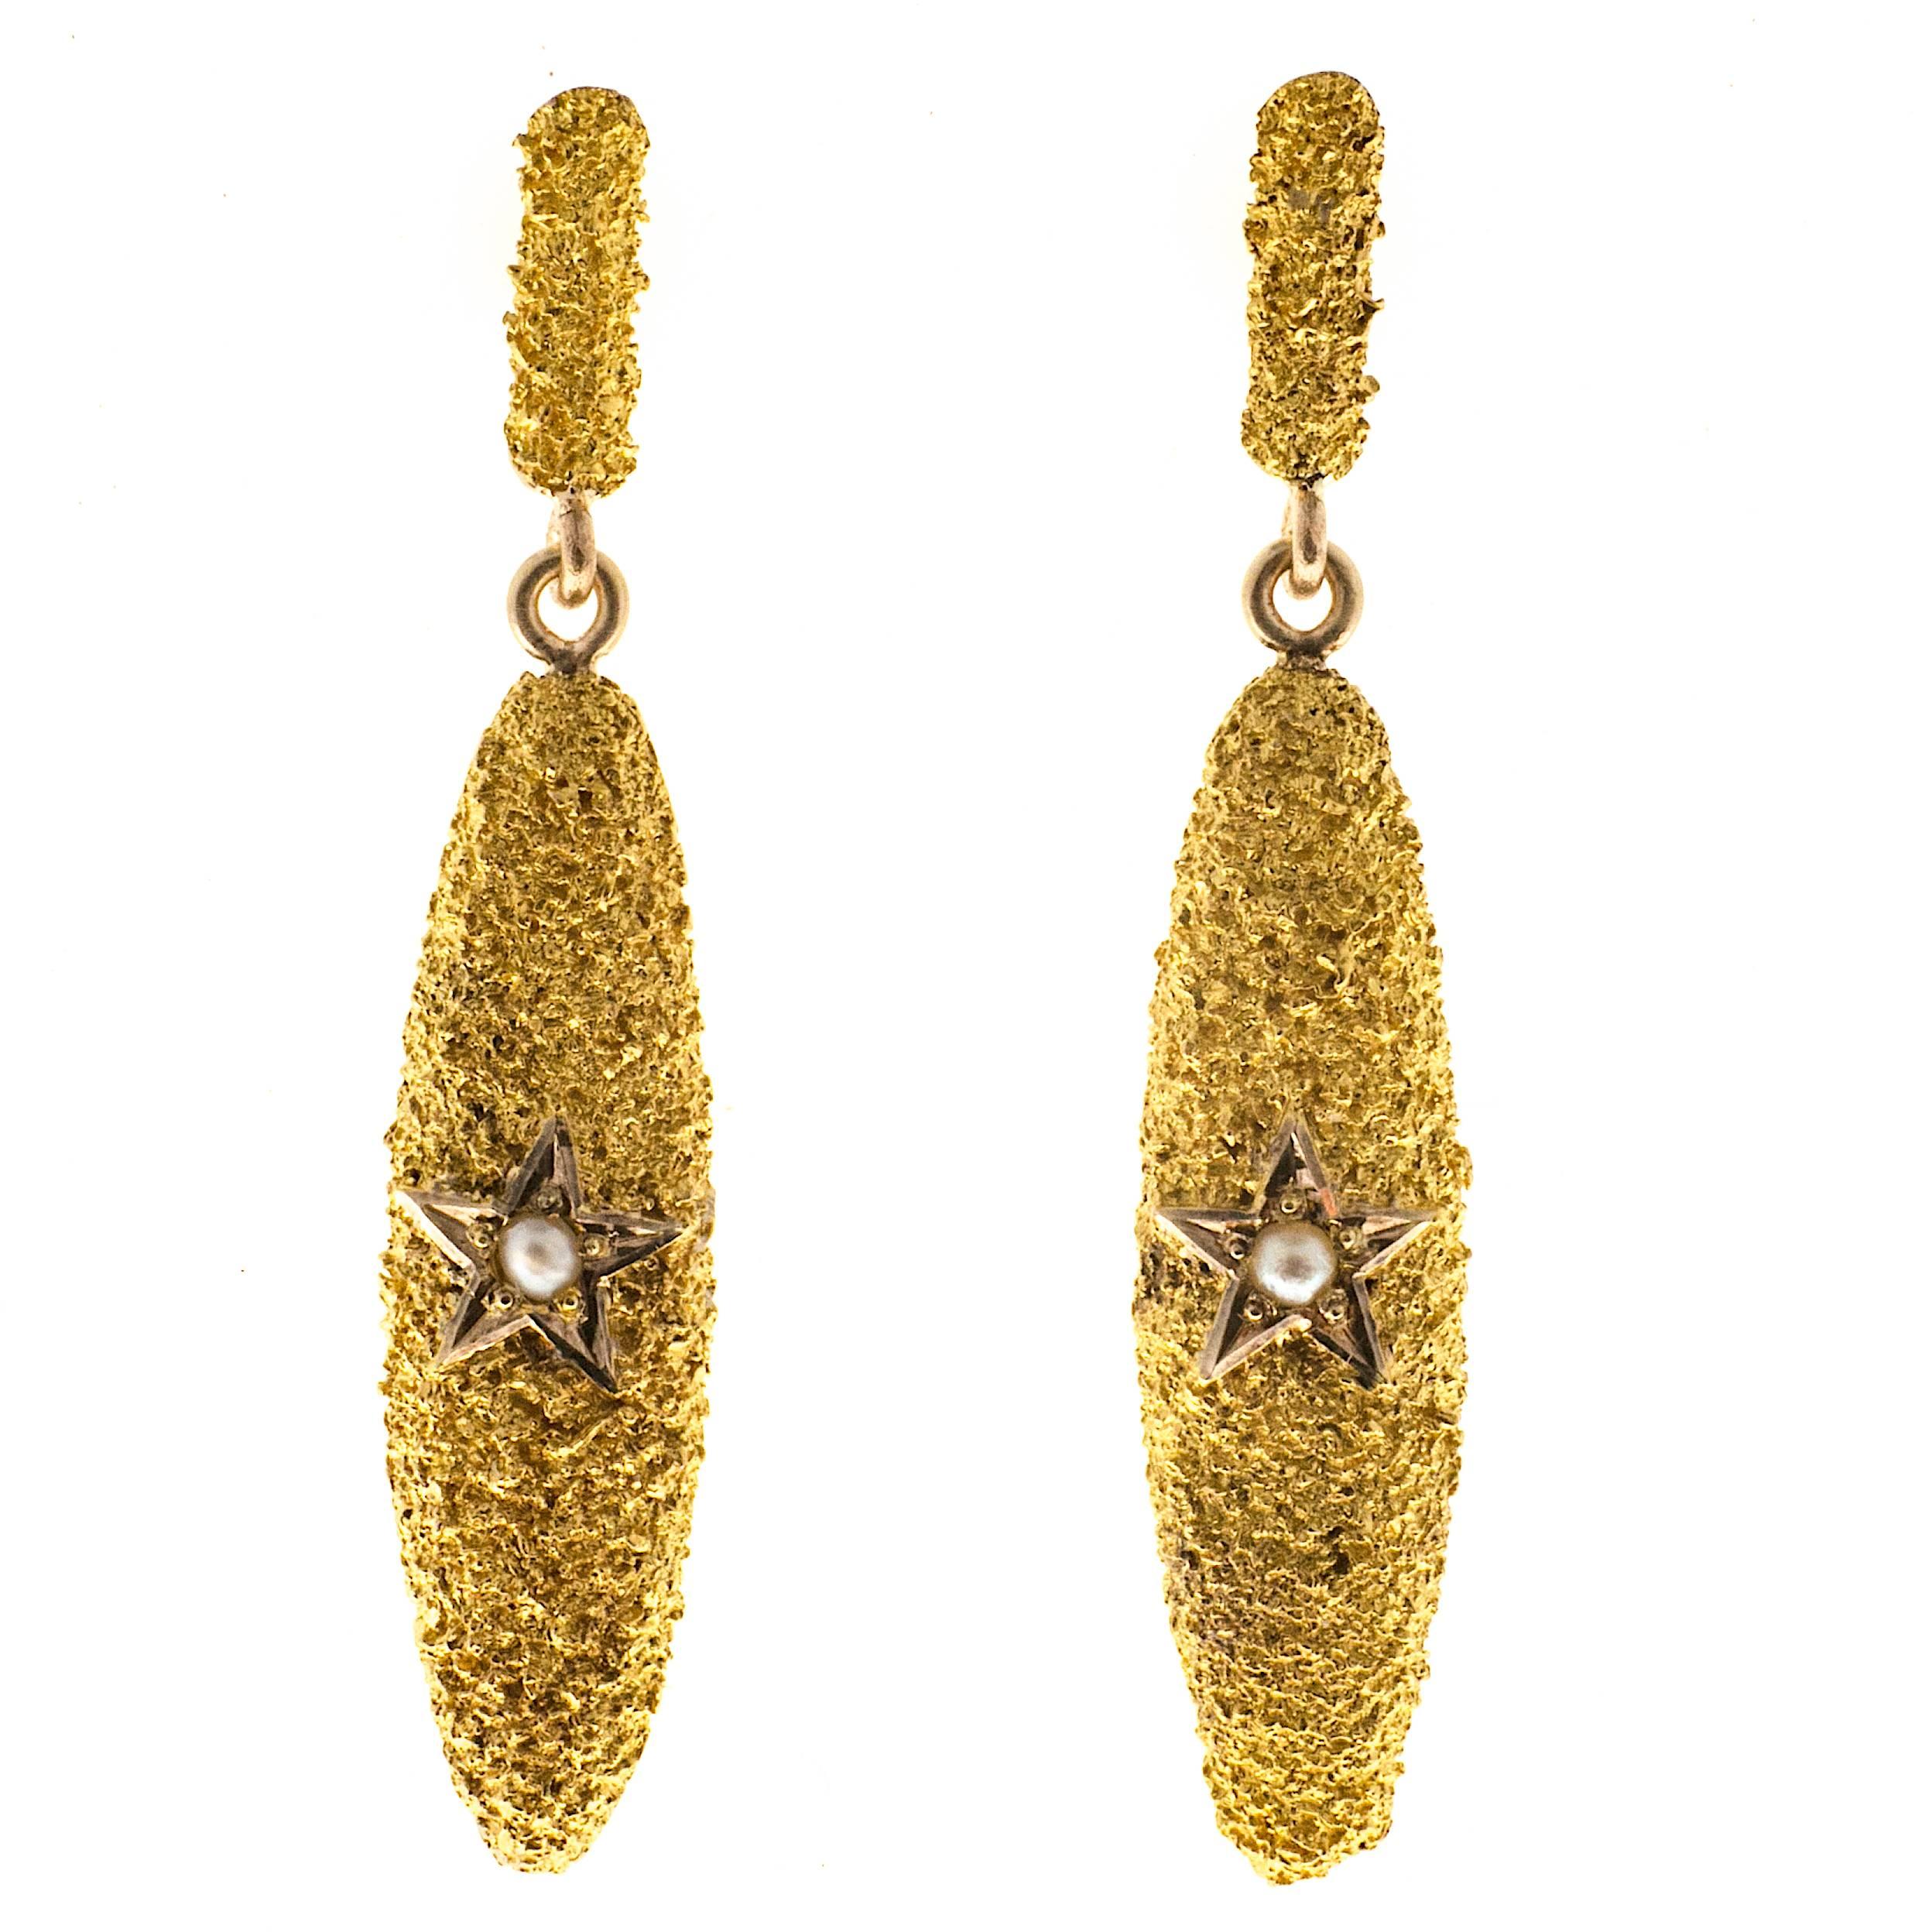 Federal style handmade simple dangle textured earrings with star centers with natural pearls. mid 1850's.

One natural pearl 1.7mm in each black enamel star
14k Yellow Gold
Tested: 14k
1.8 grams
Stamped: 35-1-2013
Top to bottom: 30.69mm or